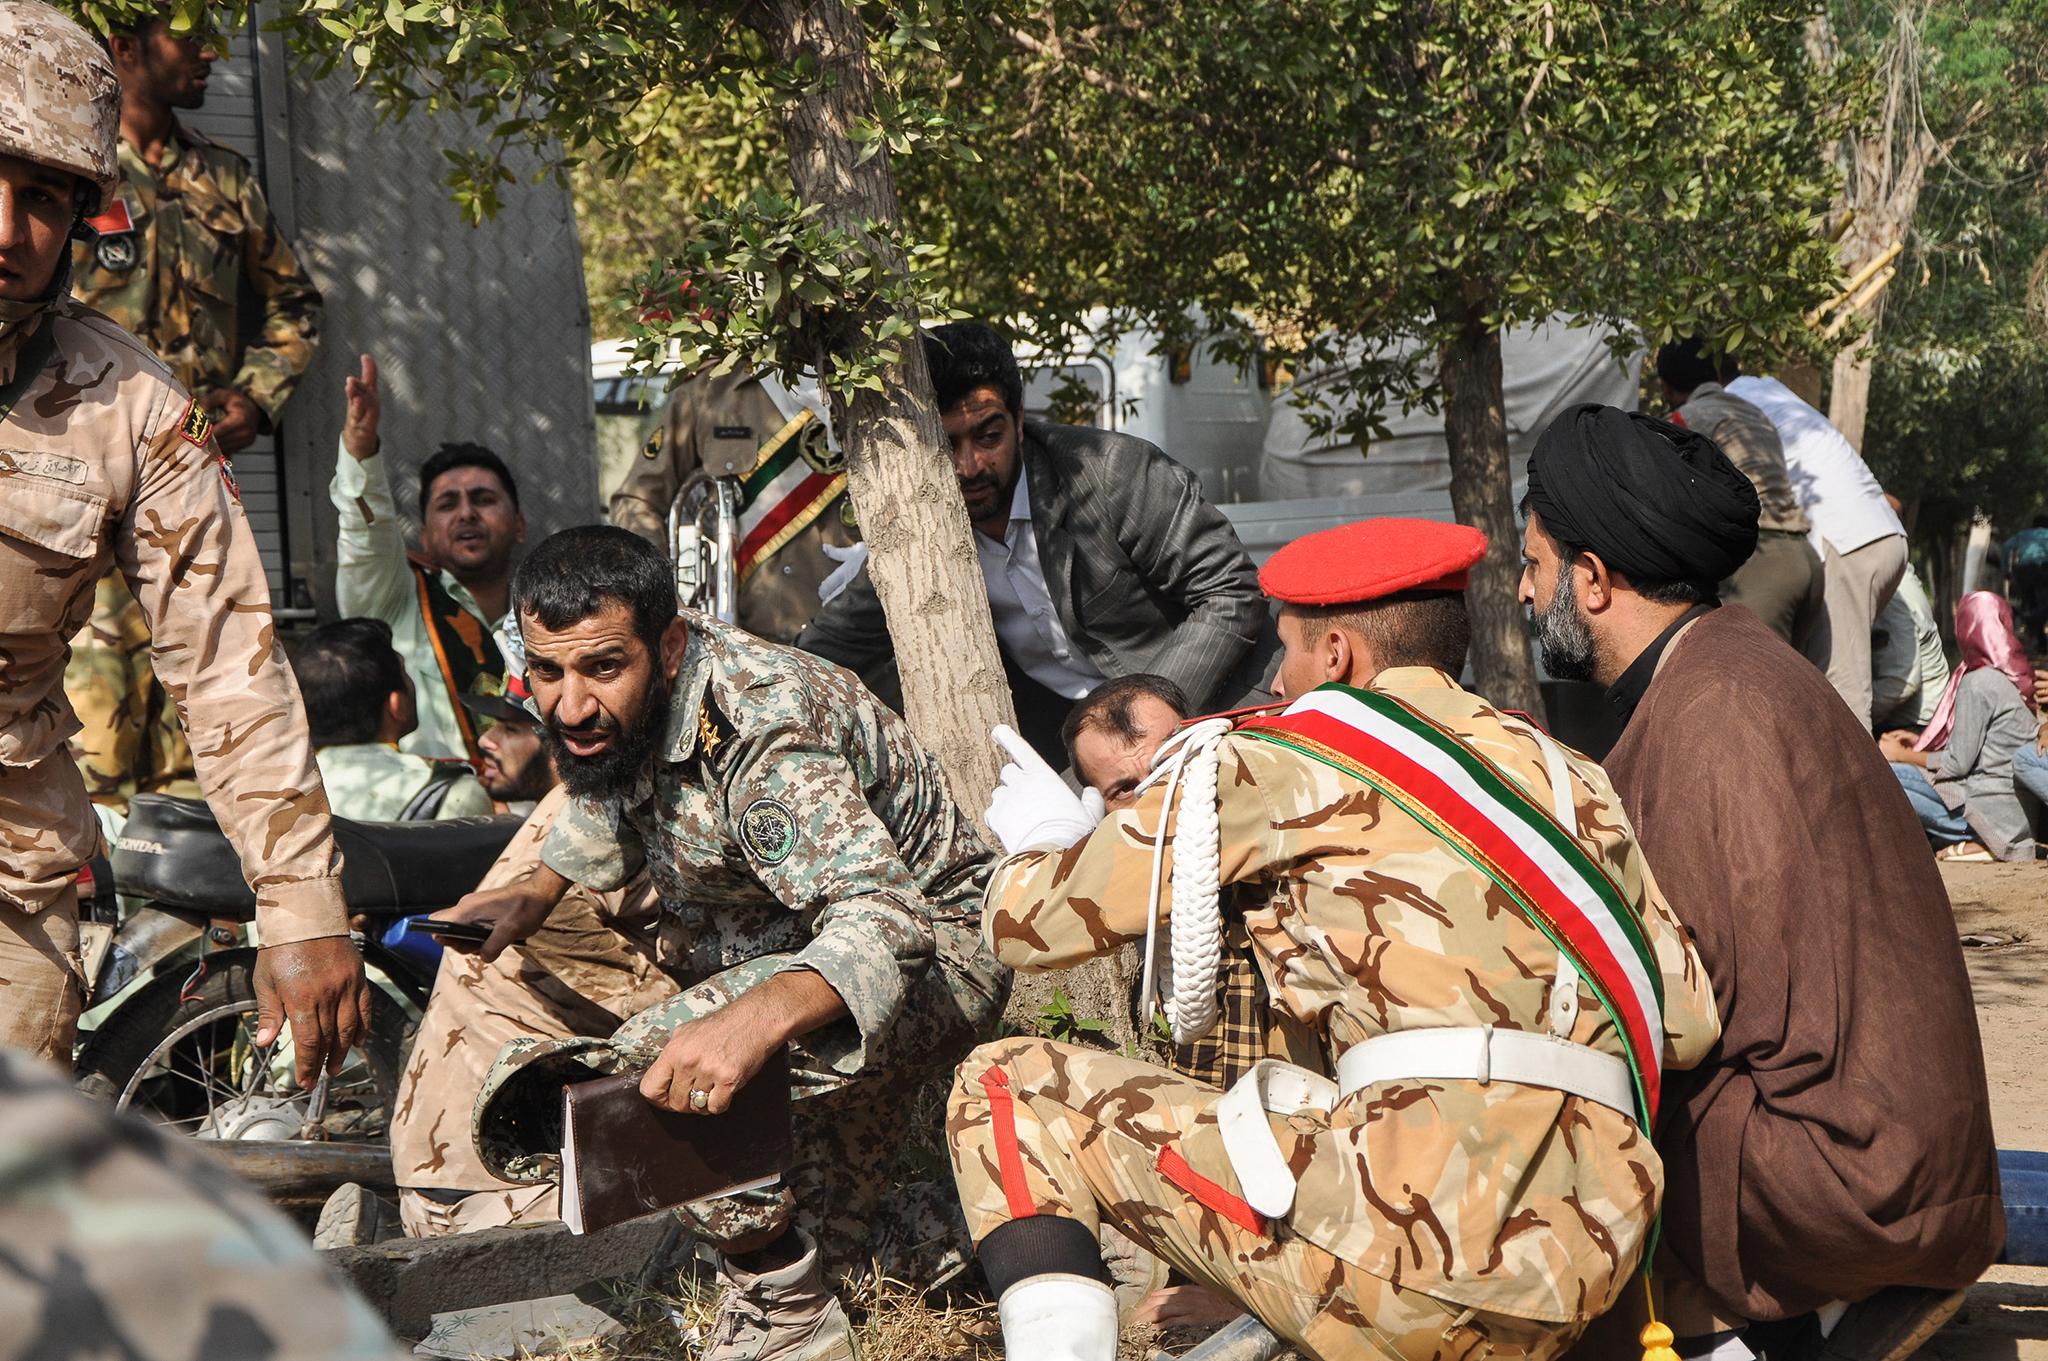 Soldiers and a cleric sit close to the ground seeking cover at the scene of an attack on a military parade in Ahvaz in September